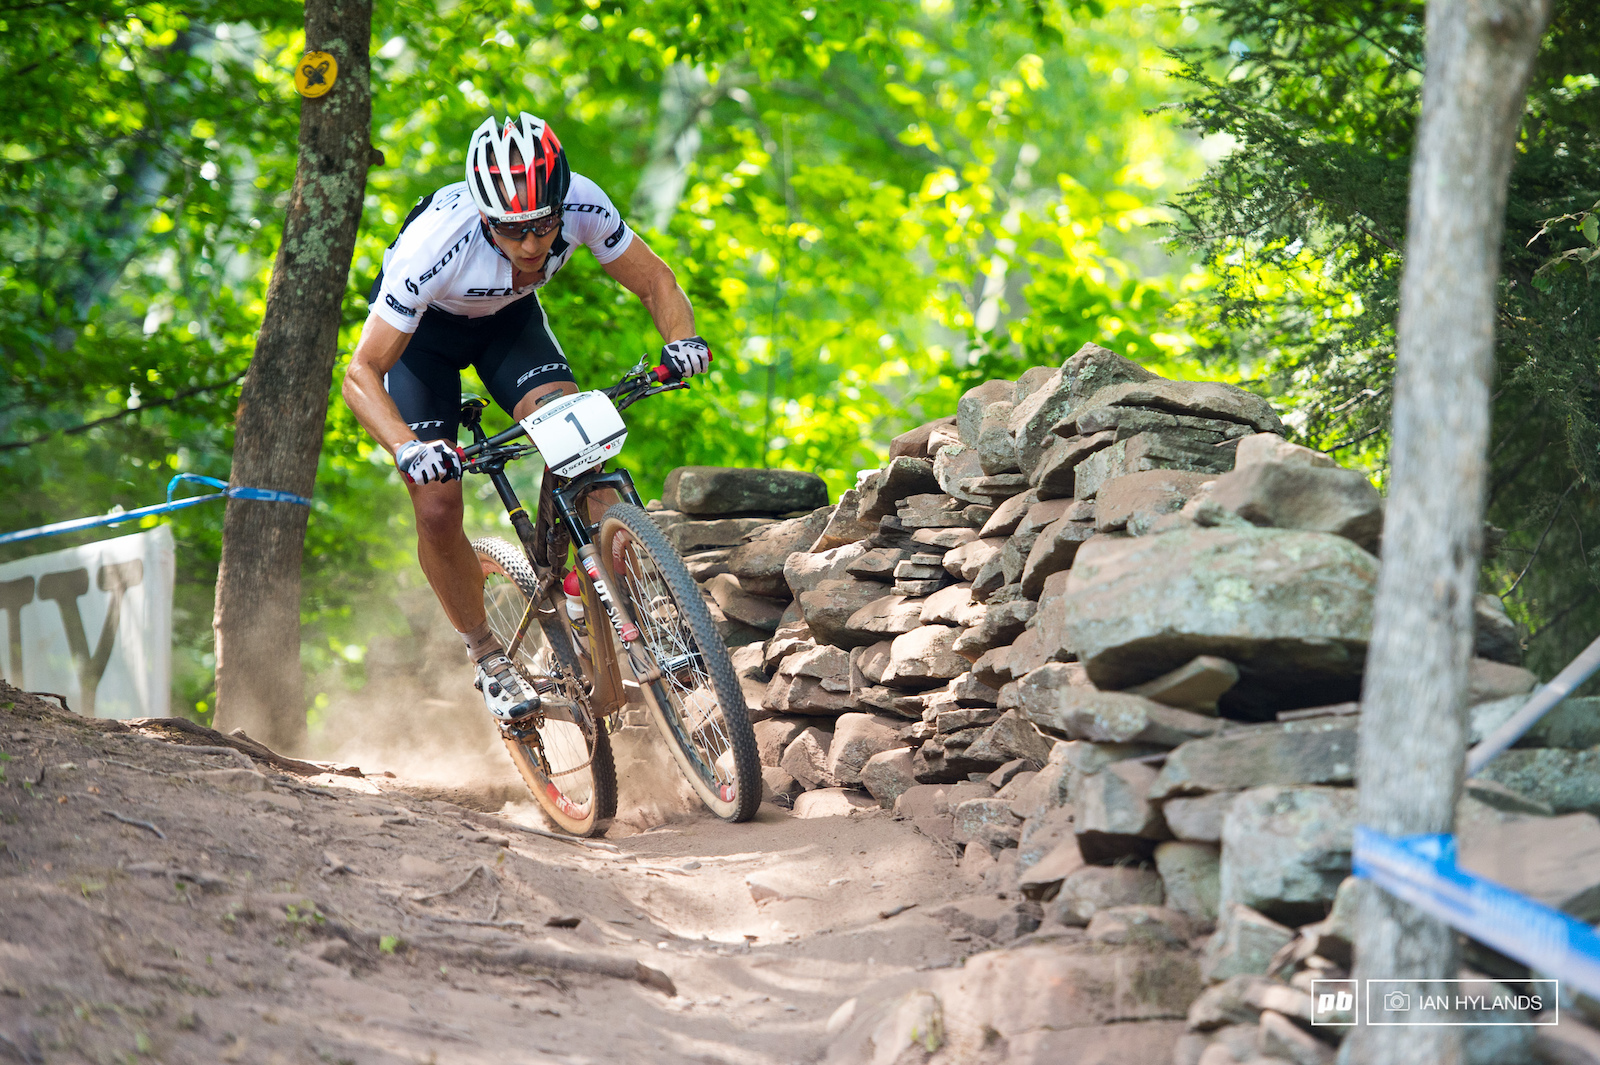 Dust was a huge part of the racing here at Windham. Nino Schurter out in front and away from the dust...